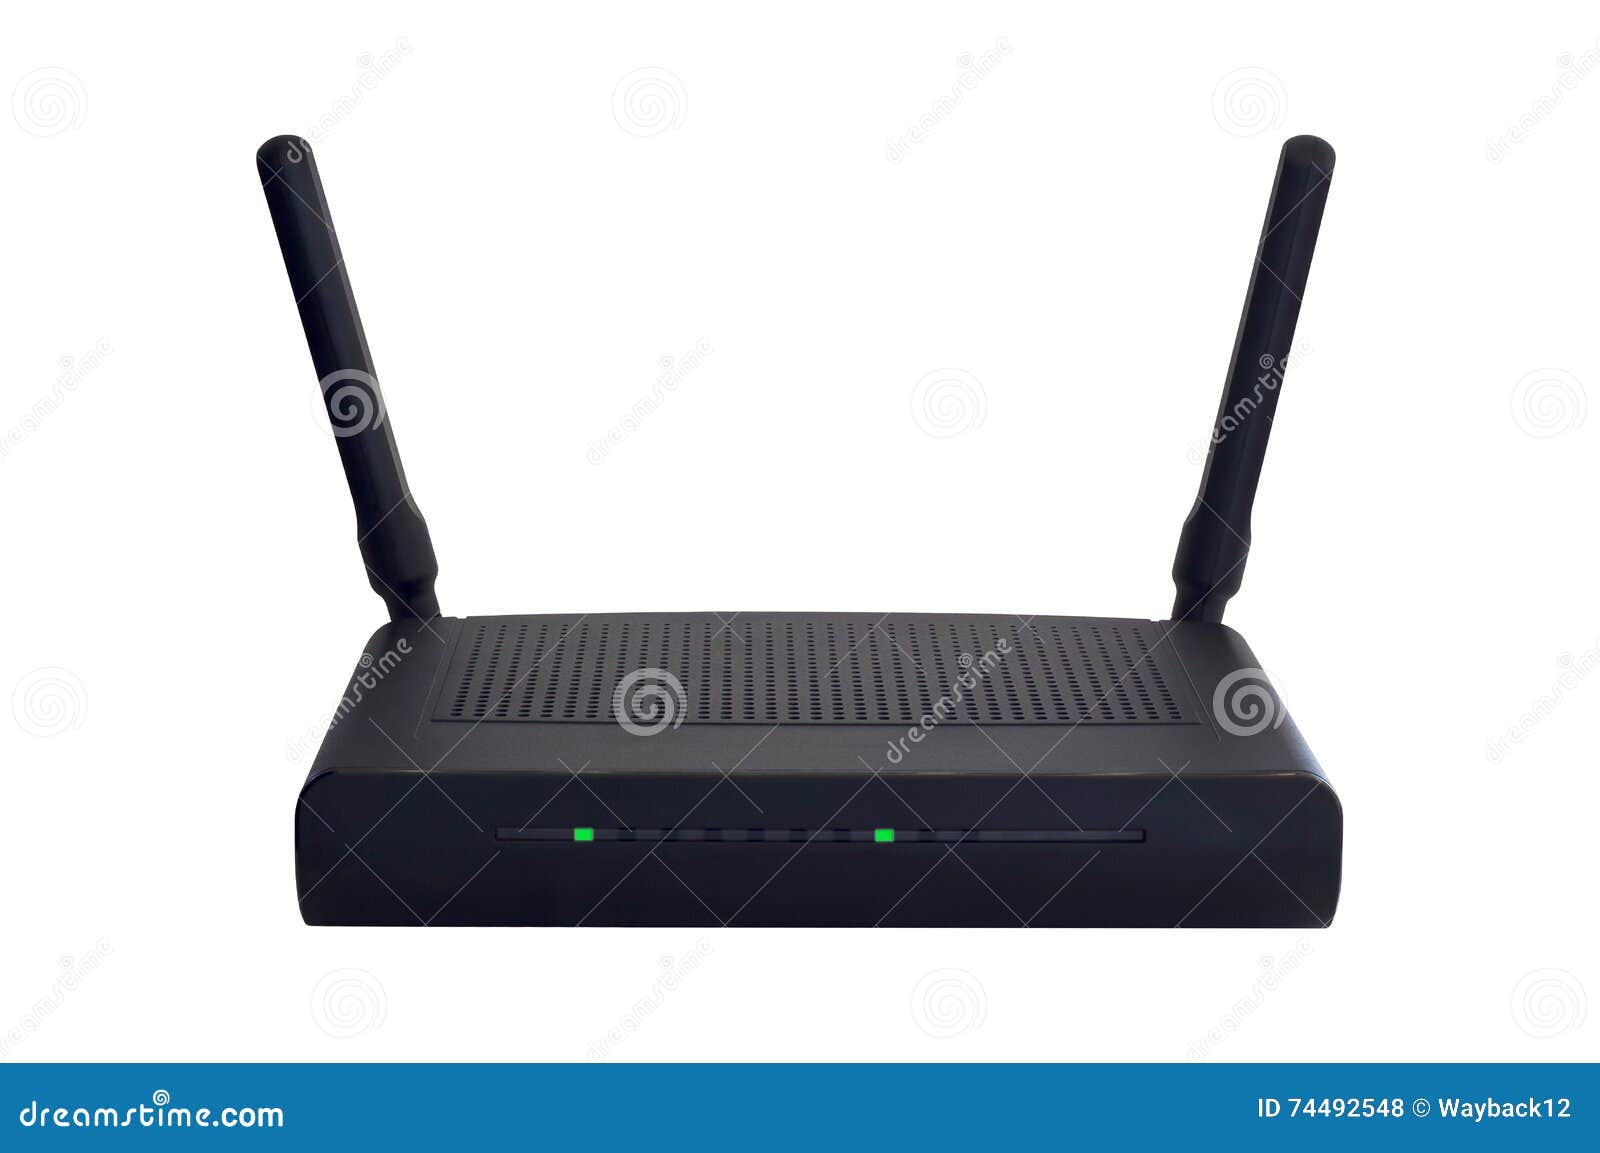 isolate modem router